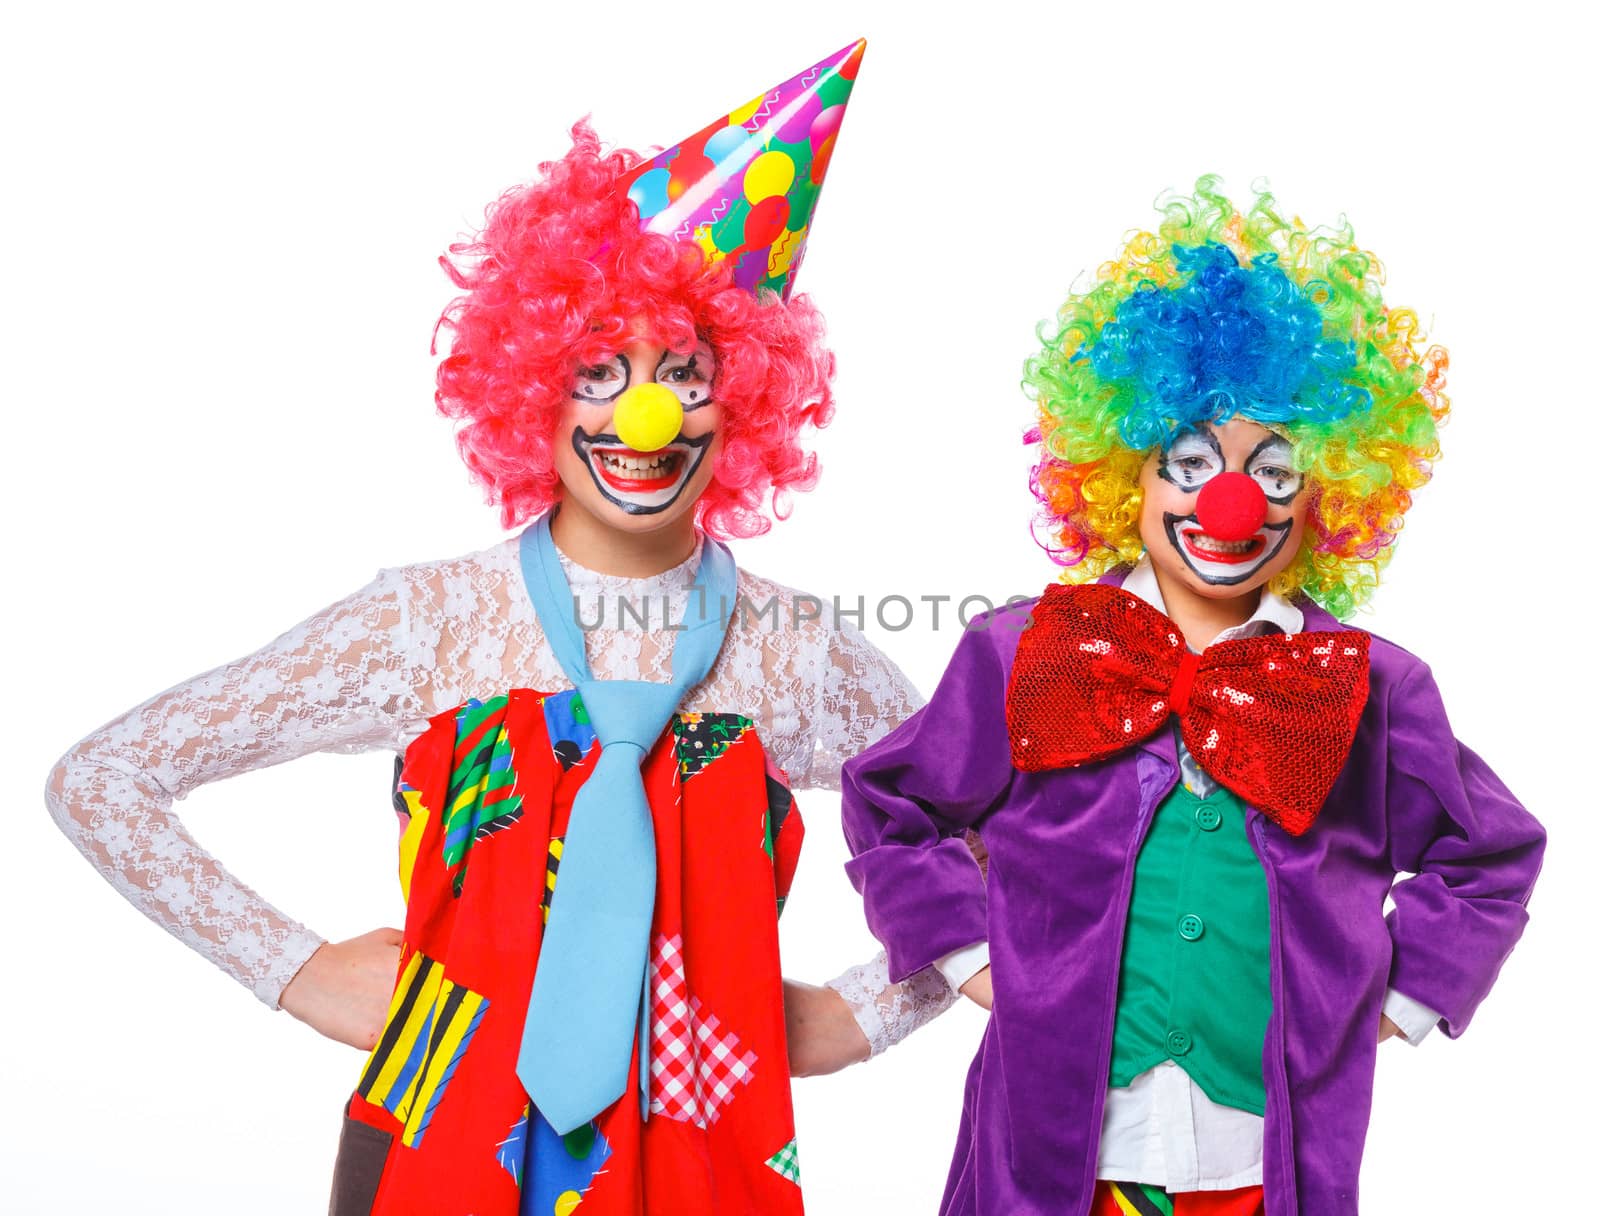 Portrait of a cute boy and girl clowns. Isolated on white background.